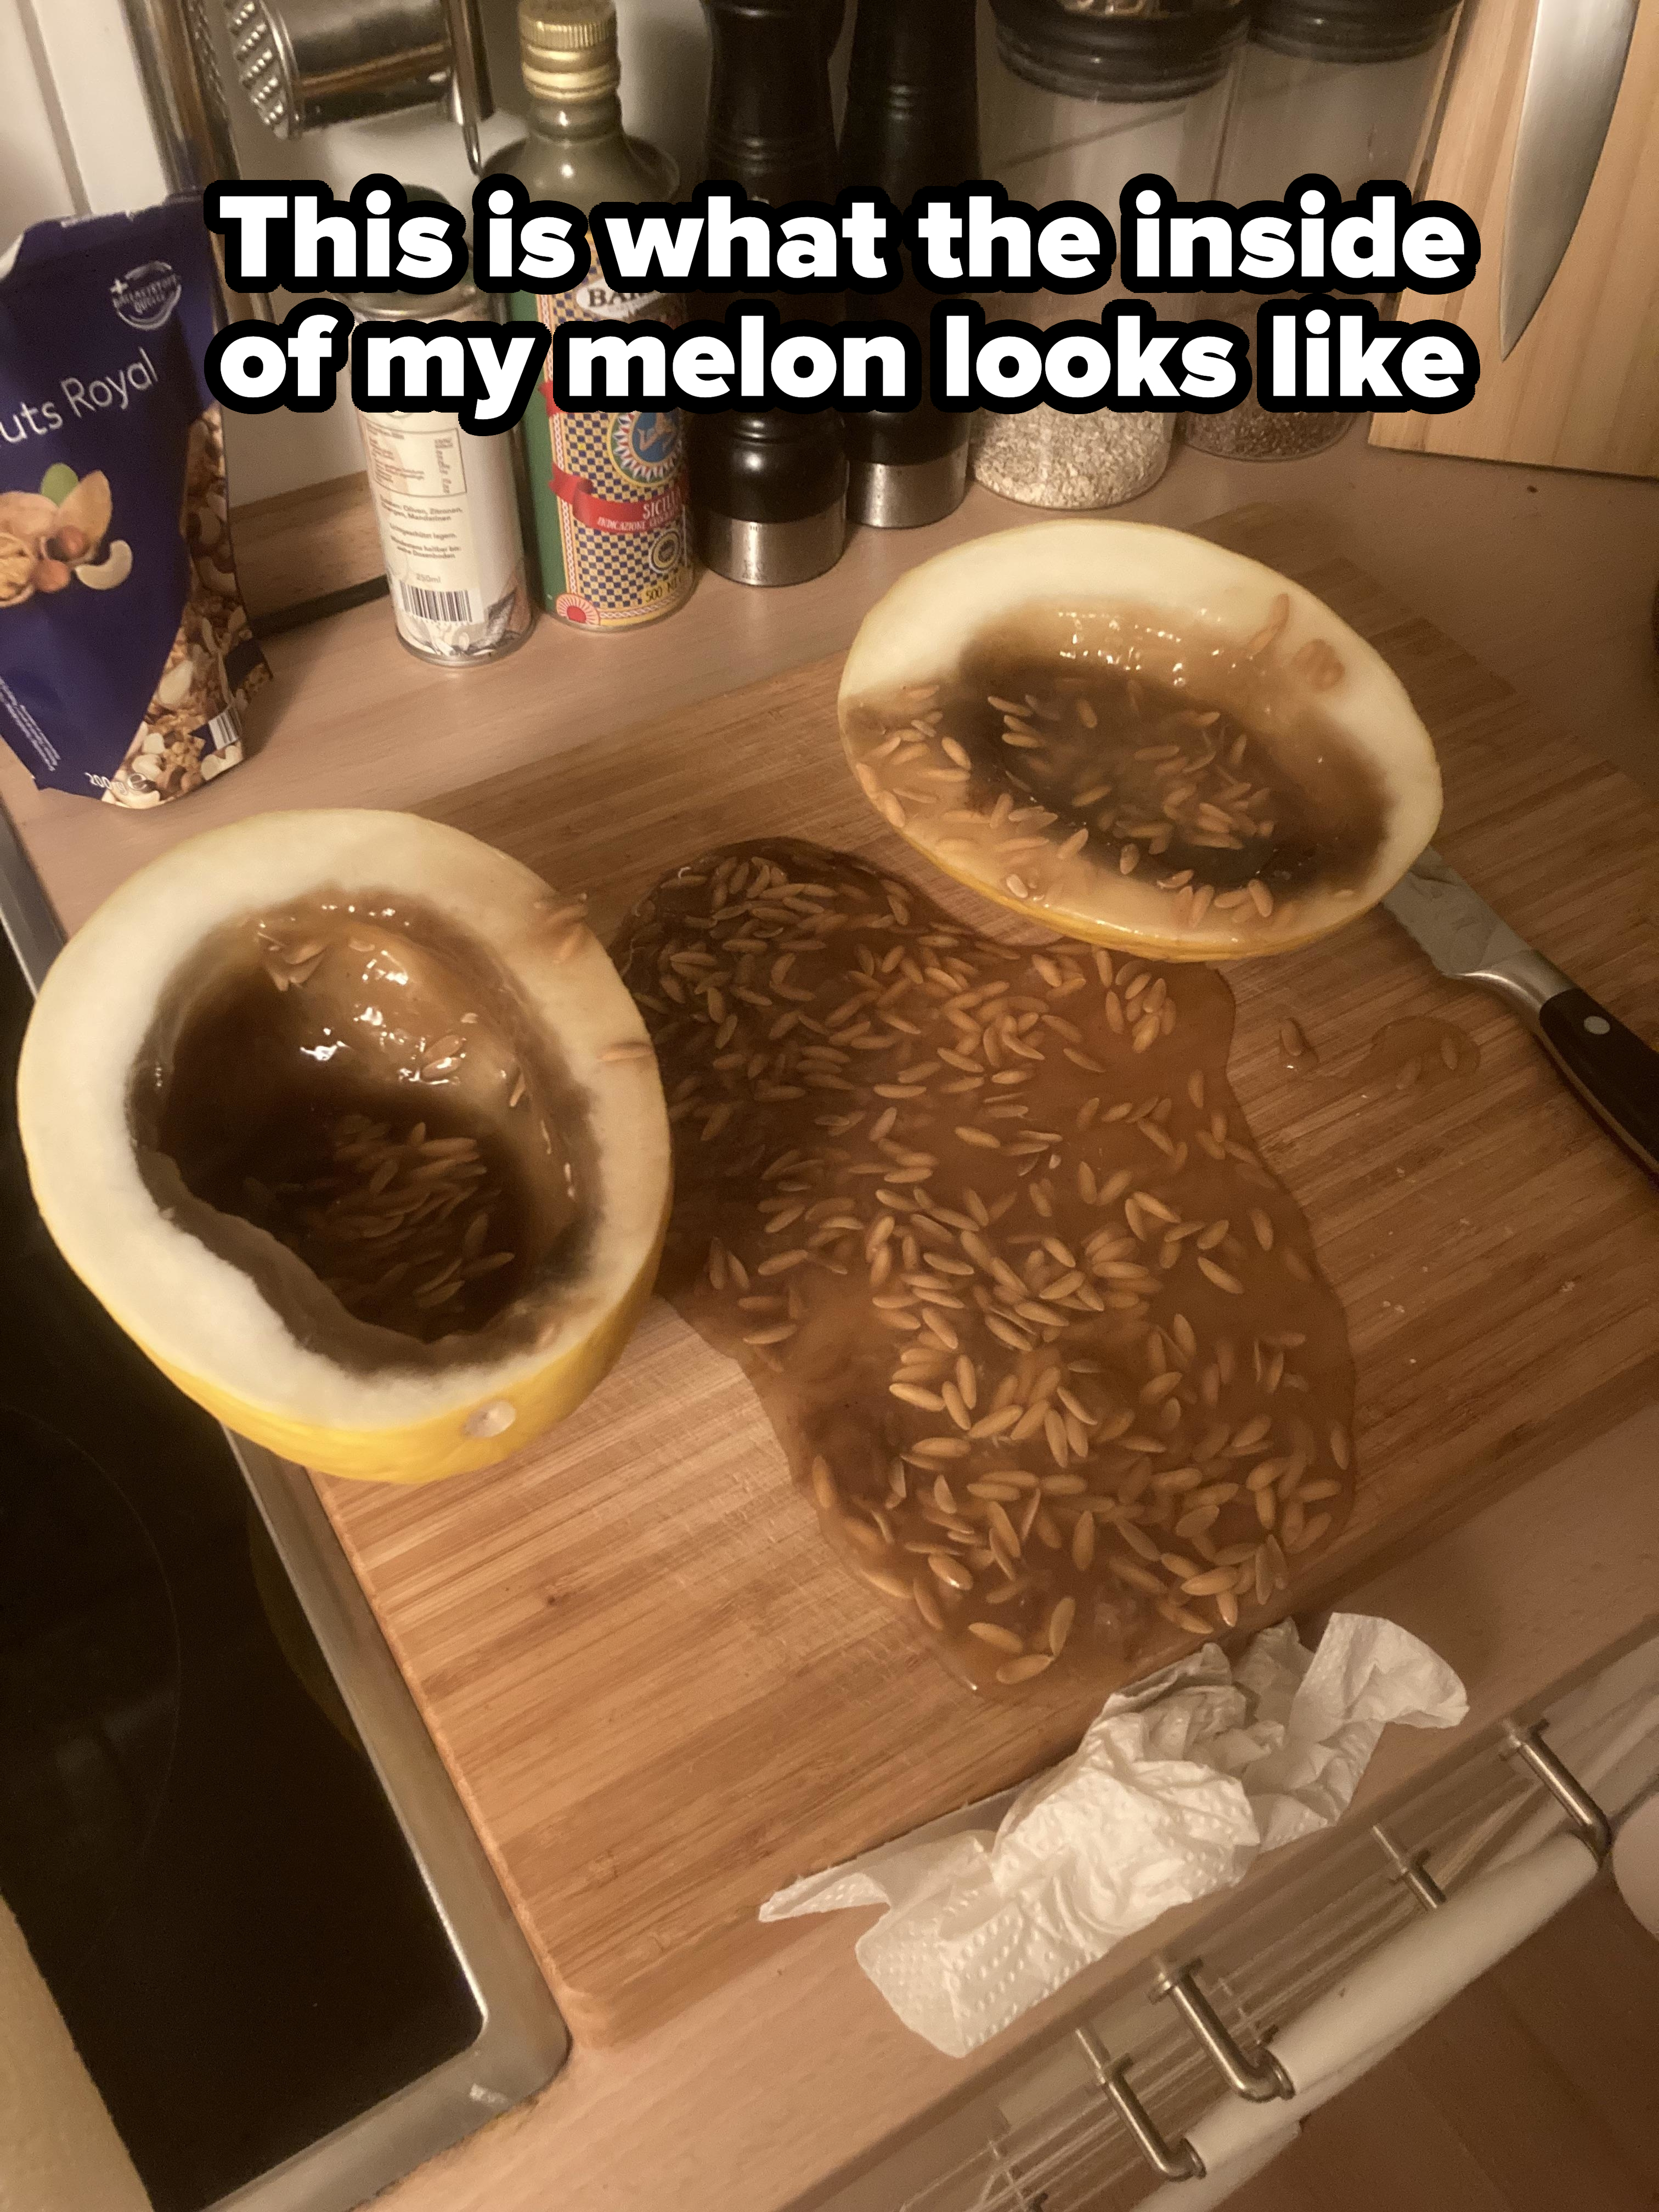 A halved melon with brownish-green liquid and seeds overflowing onto a countertop